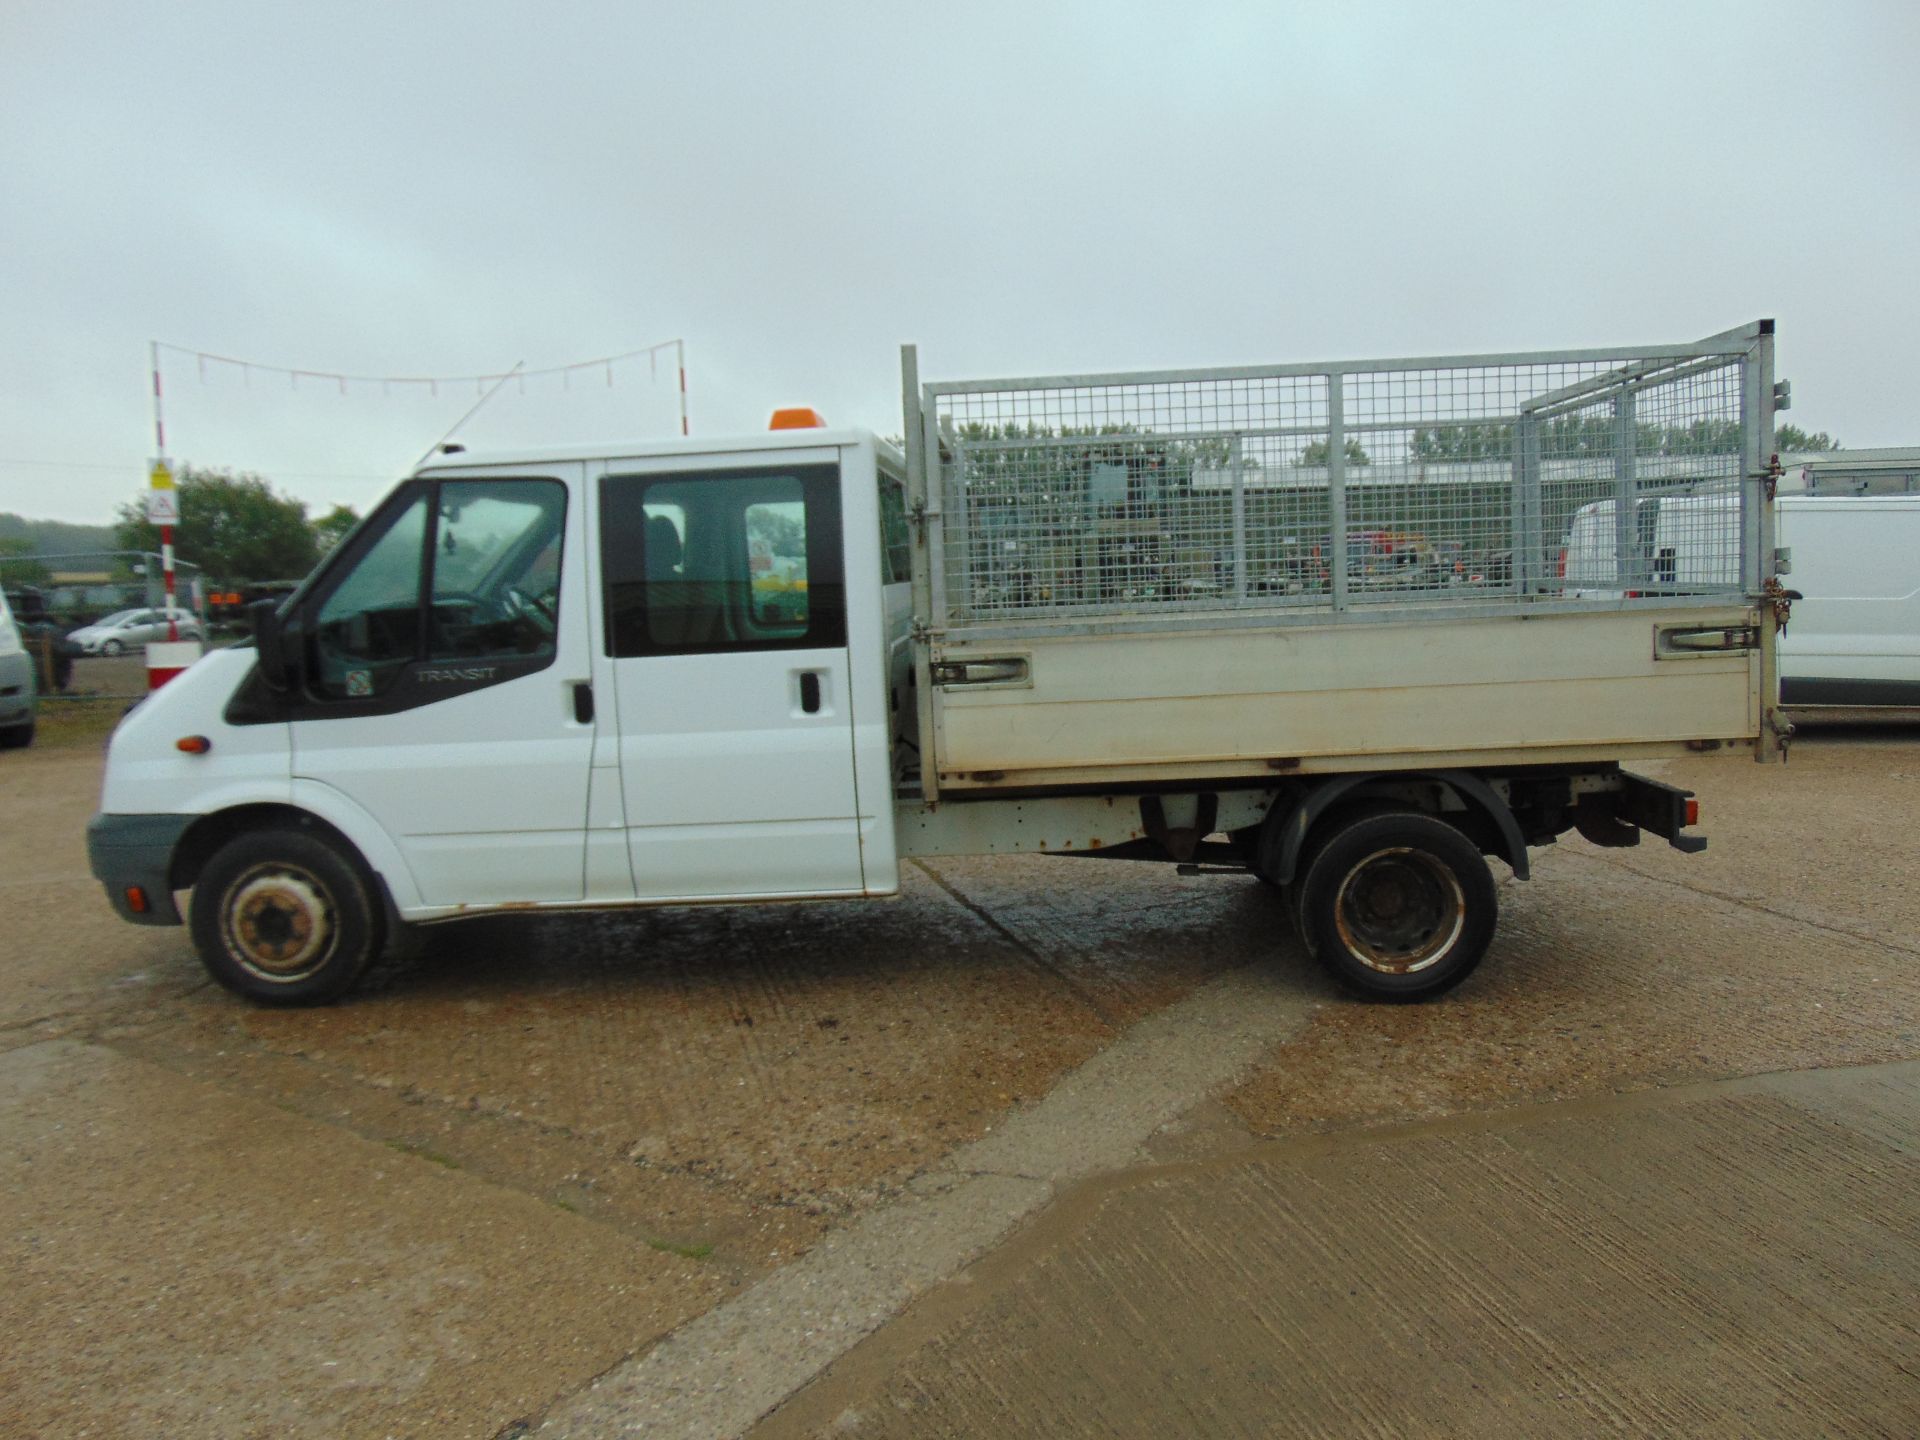 Ford Transit 115 T350 Crew Cab Flat Bed Tipper - Image 5 of 16